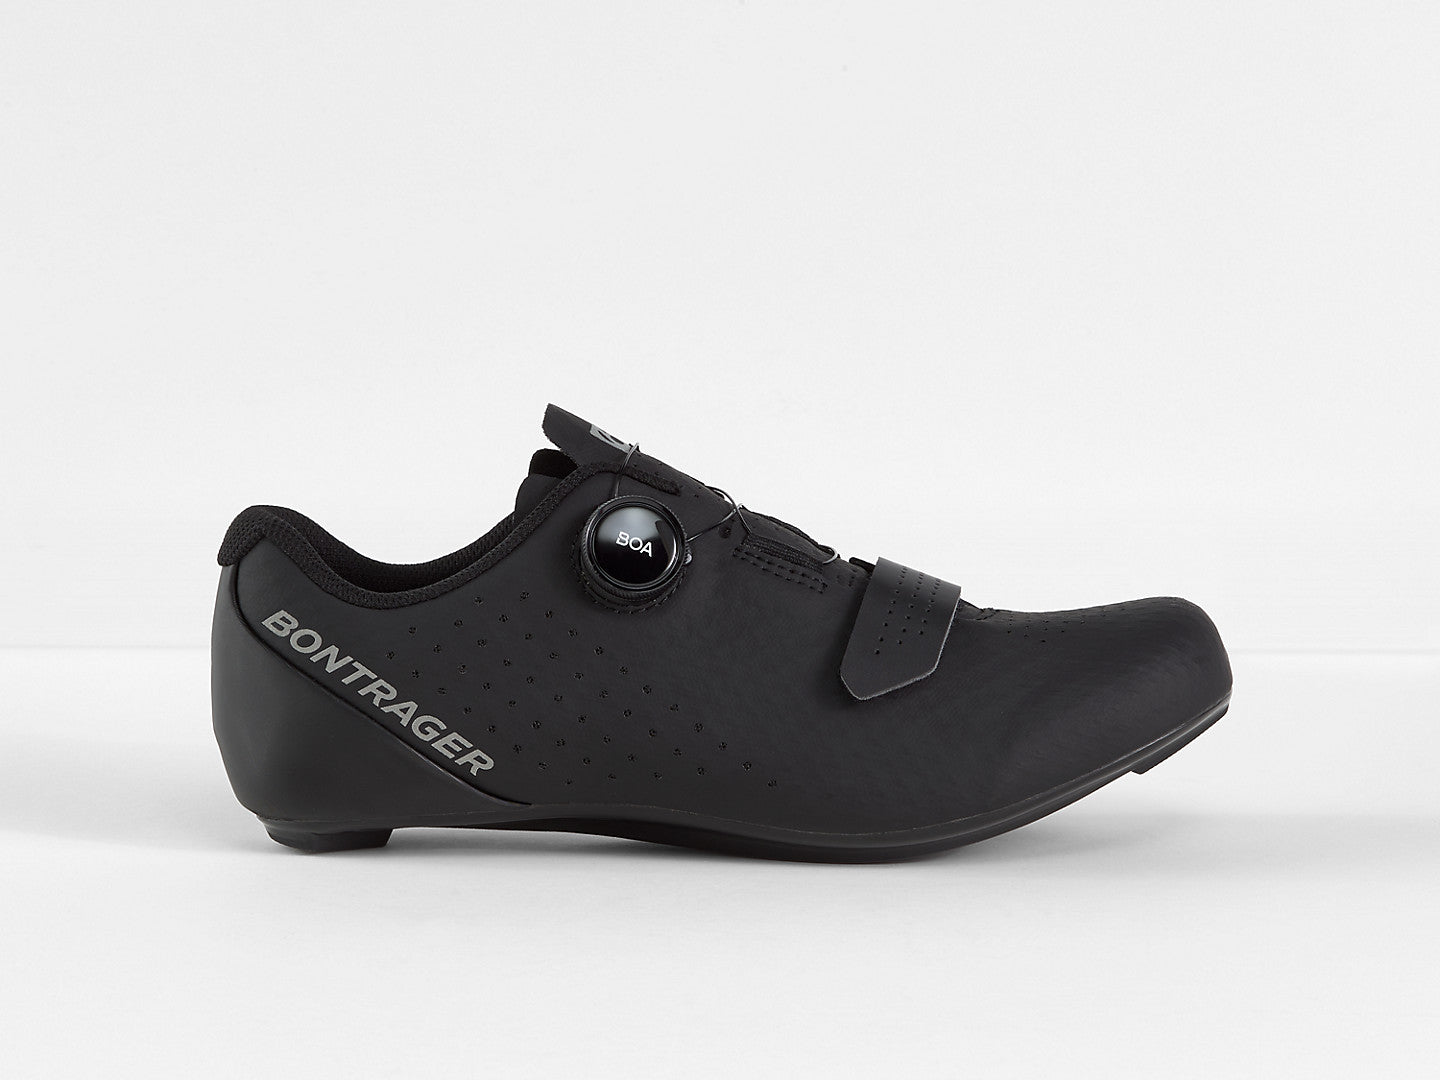 Bontrager Circuit Road Cycling Shoes- Cycling Shoes- Road Cycling Shoes